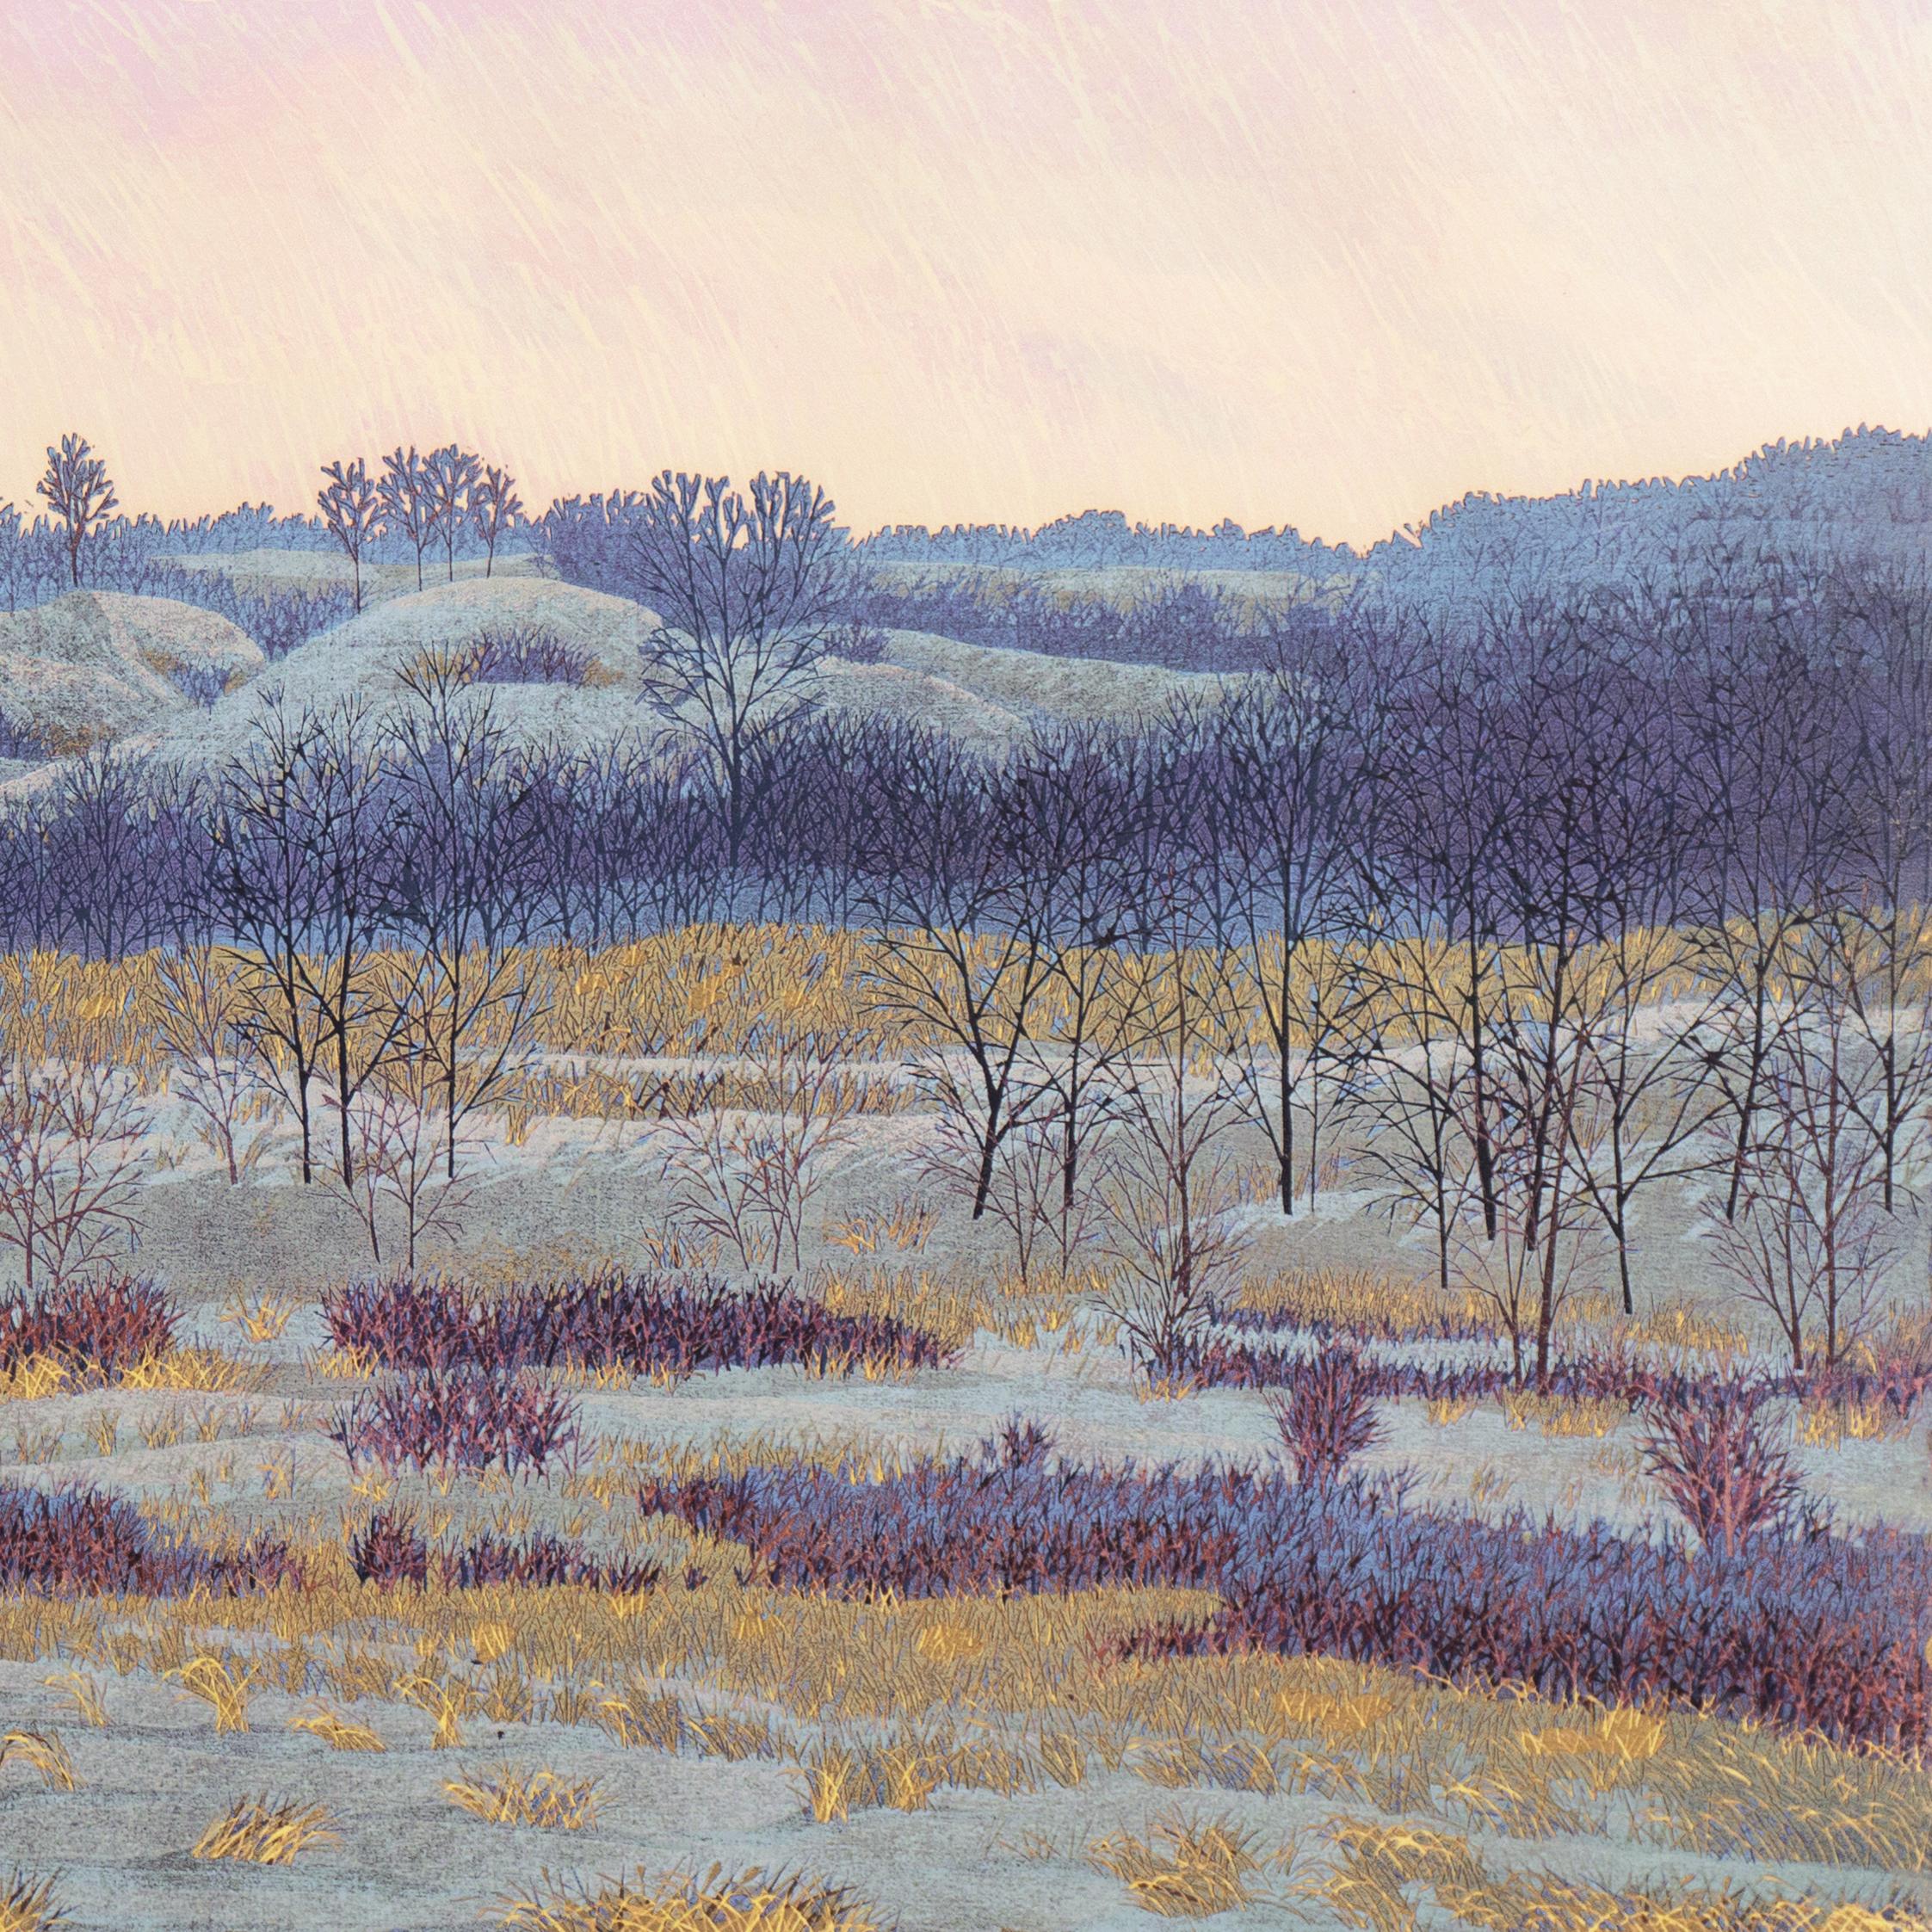 Signed lower right, 'G. Mortensen' for Gordon Mortensen (American, born 1938) and dated 1979. Titled lower left, 'A Winter Afternoon' with number and limitation, lower center, '255/300'. 
Paper dimensions: 15 x 22 inches. 

Gordon Mortensen received